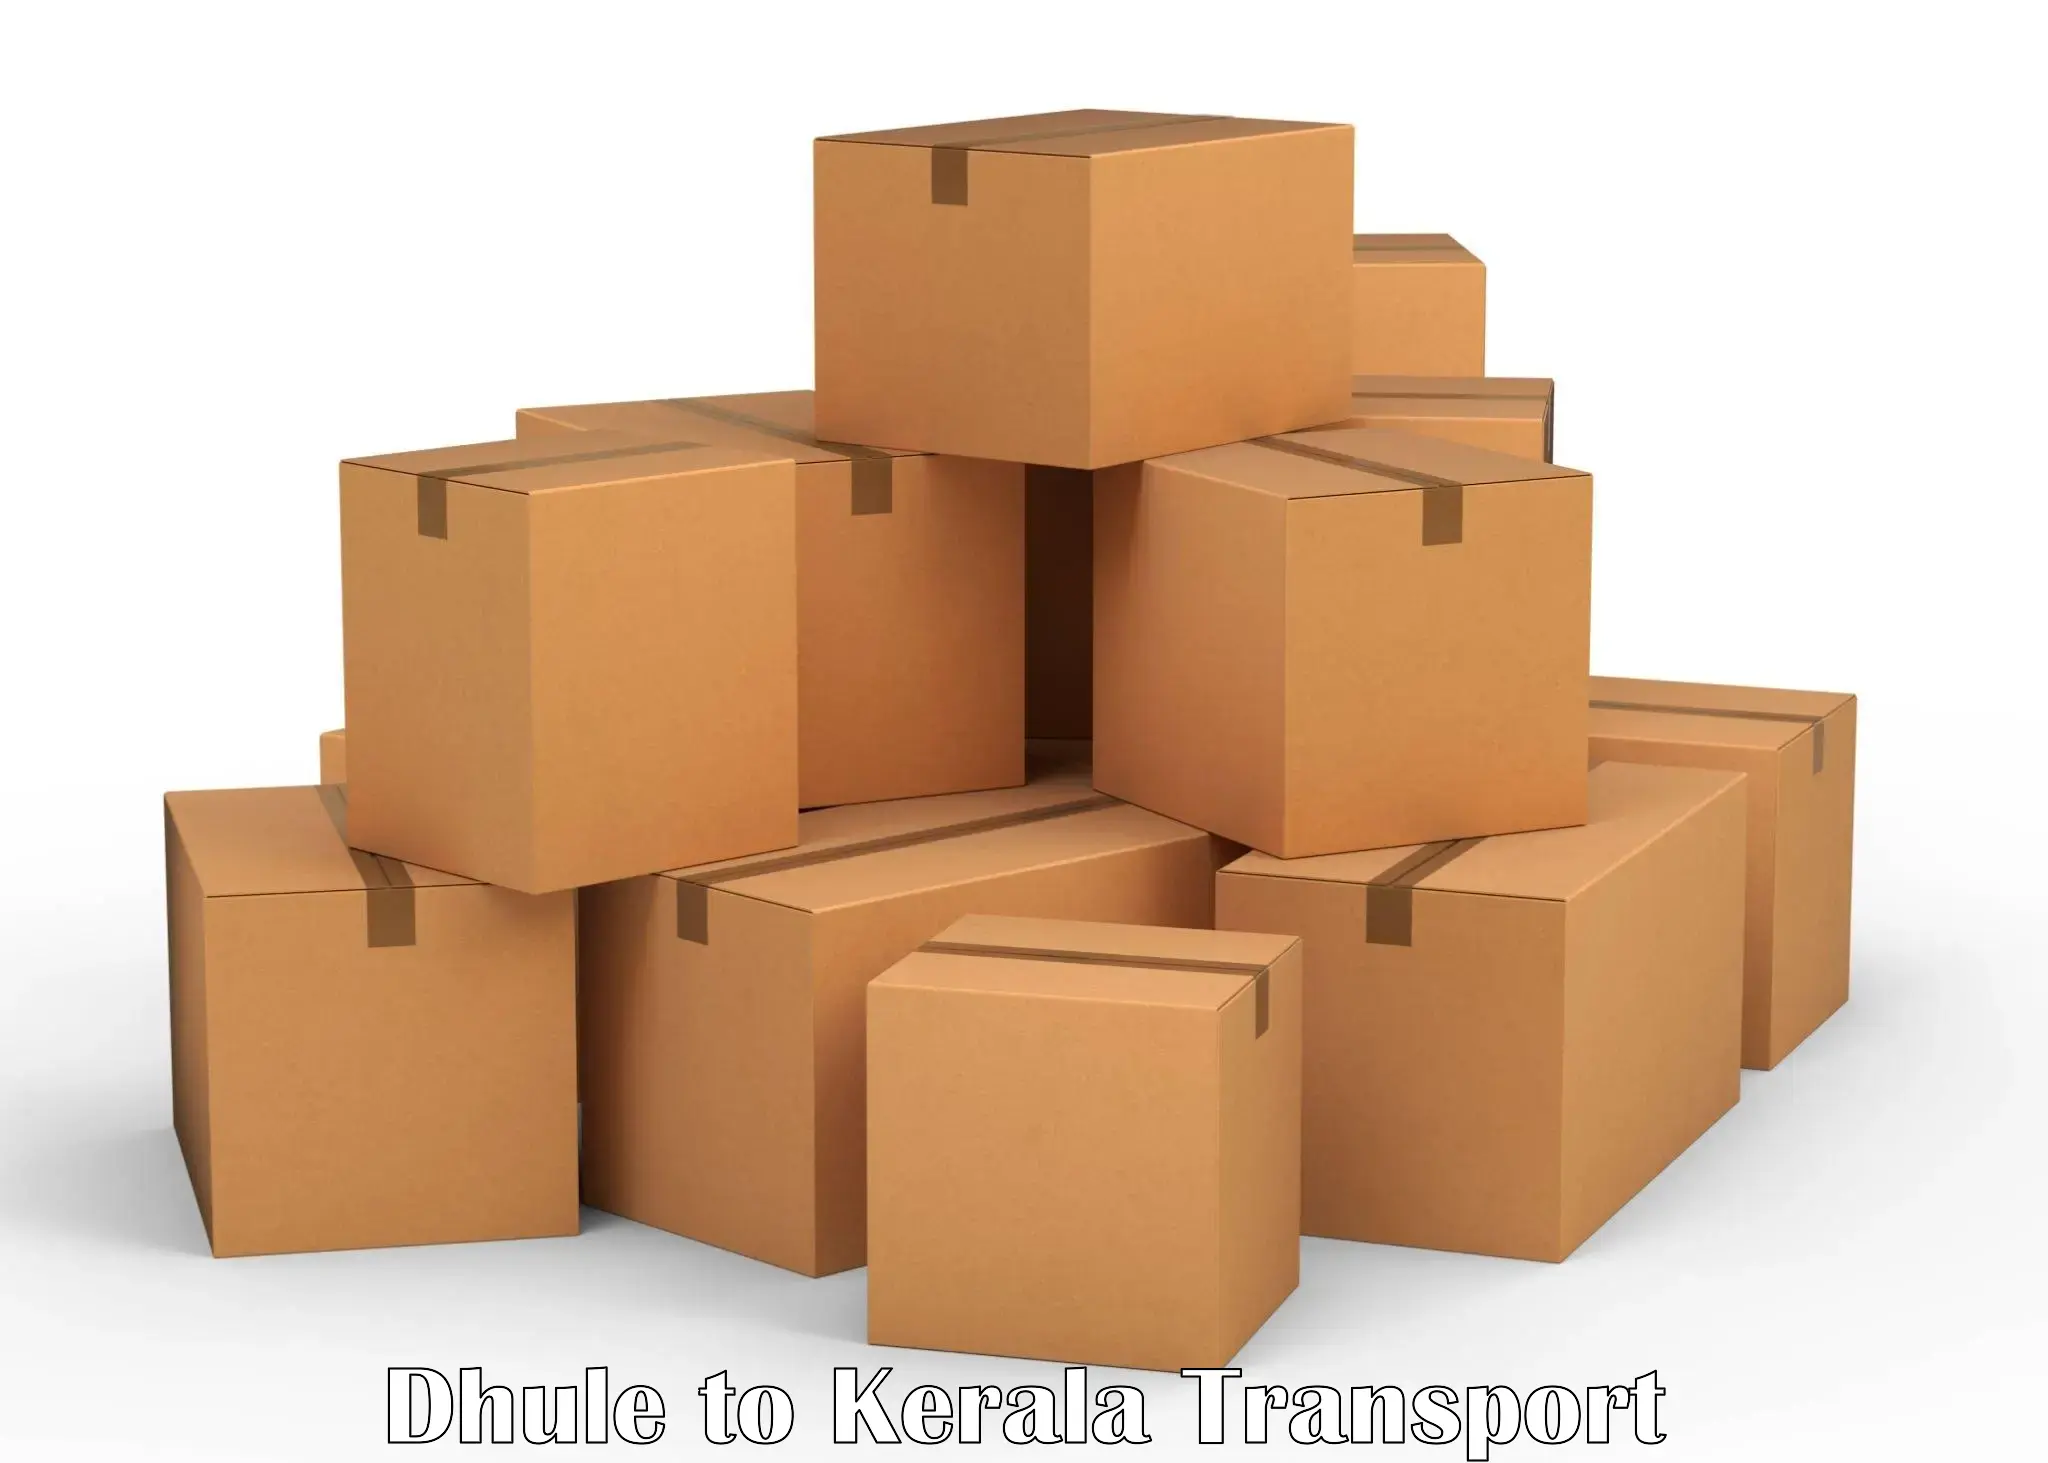 Parcel transport services Dhule to Cochin Port Kochi